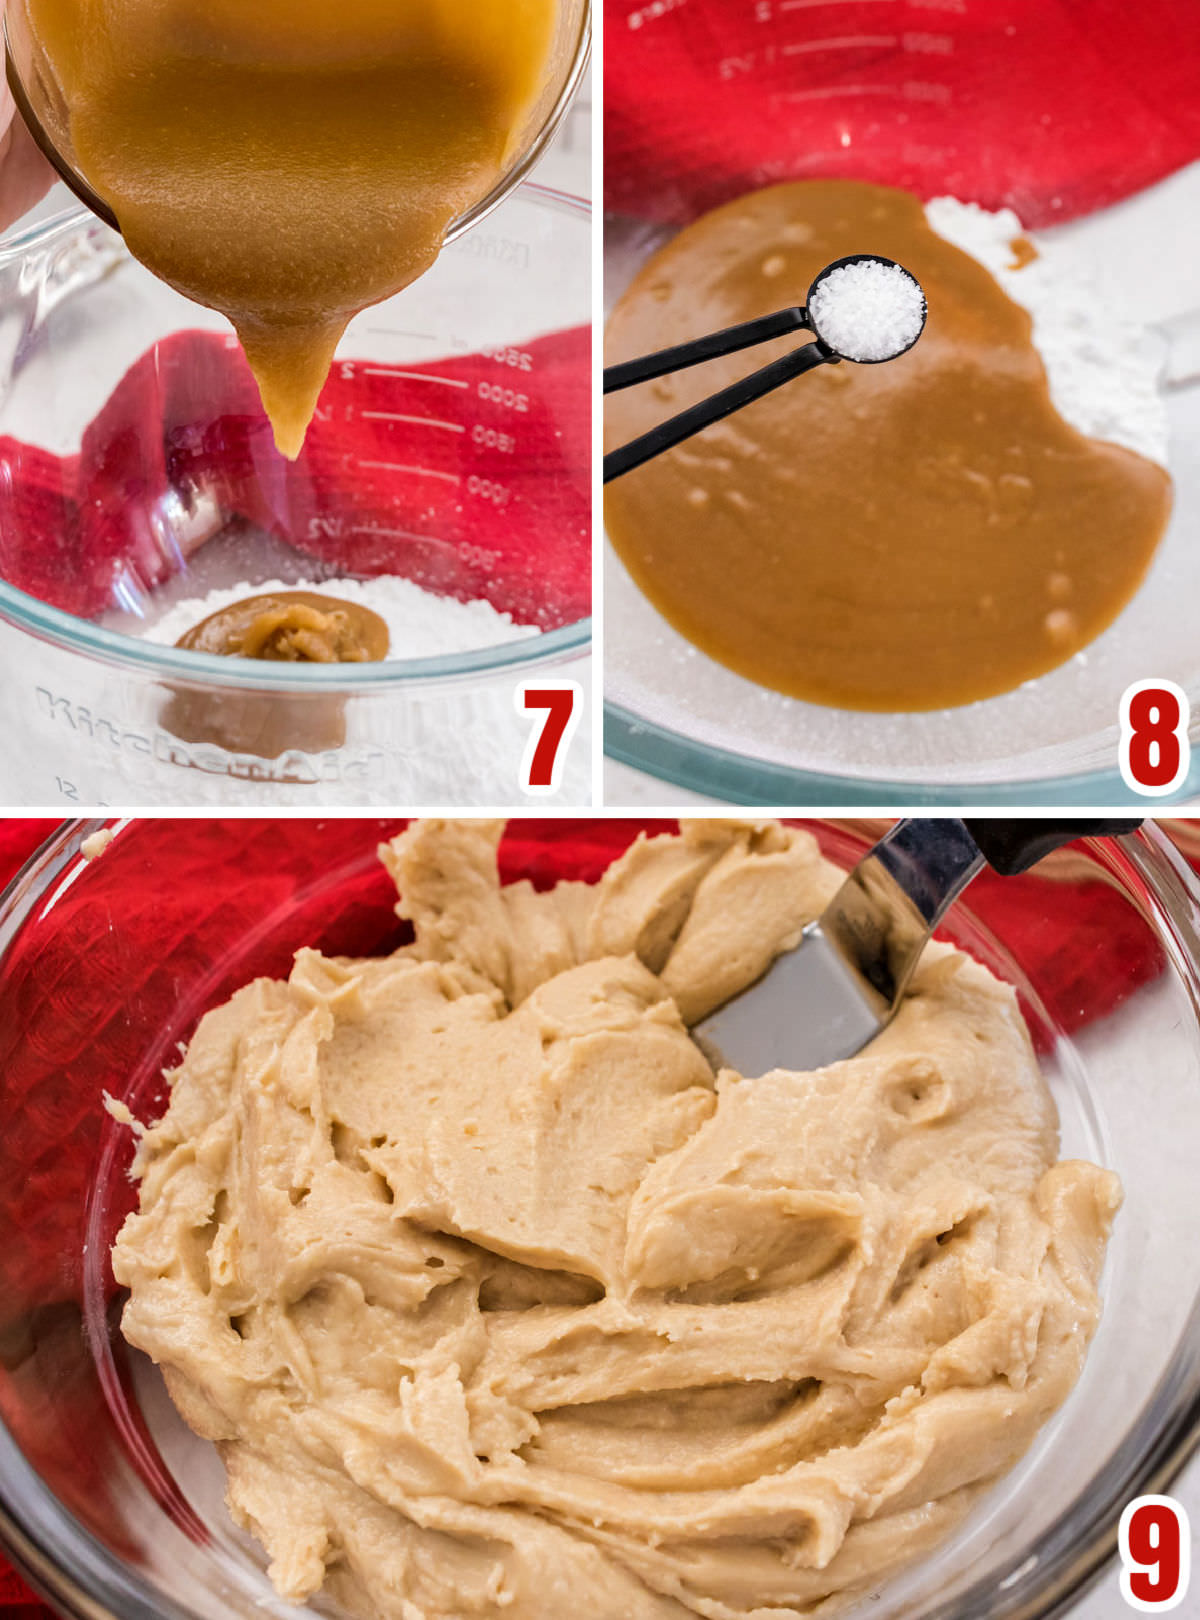 Collage image showing the steps for turning homemade caramel sauce into Salted Caramel Frosting.